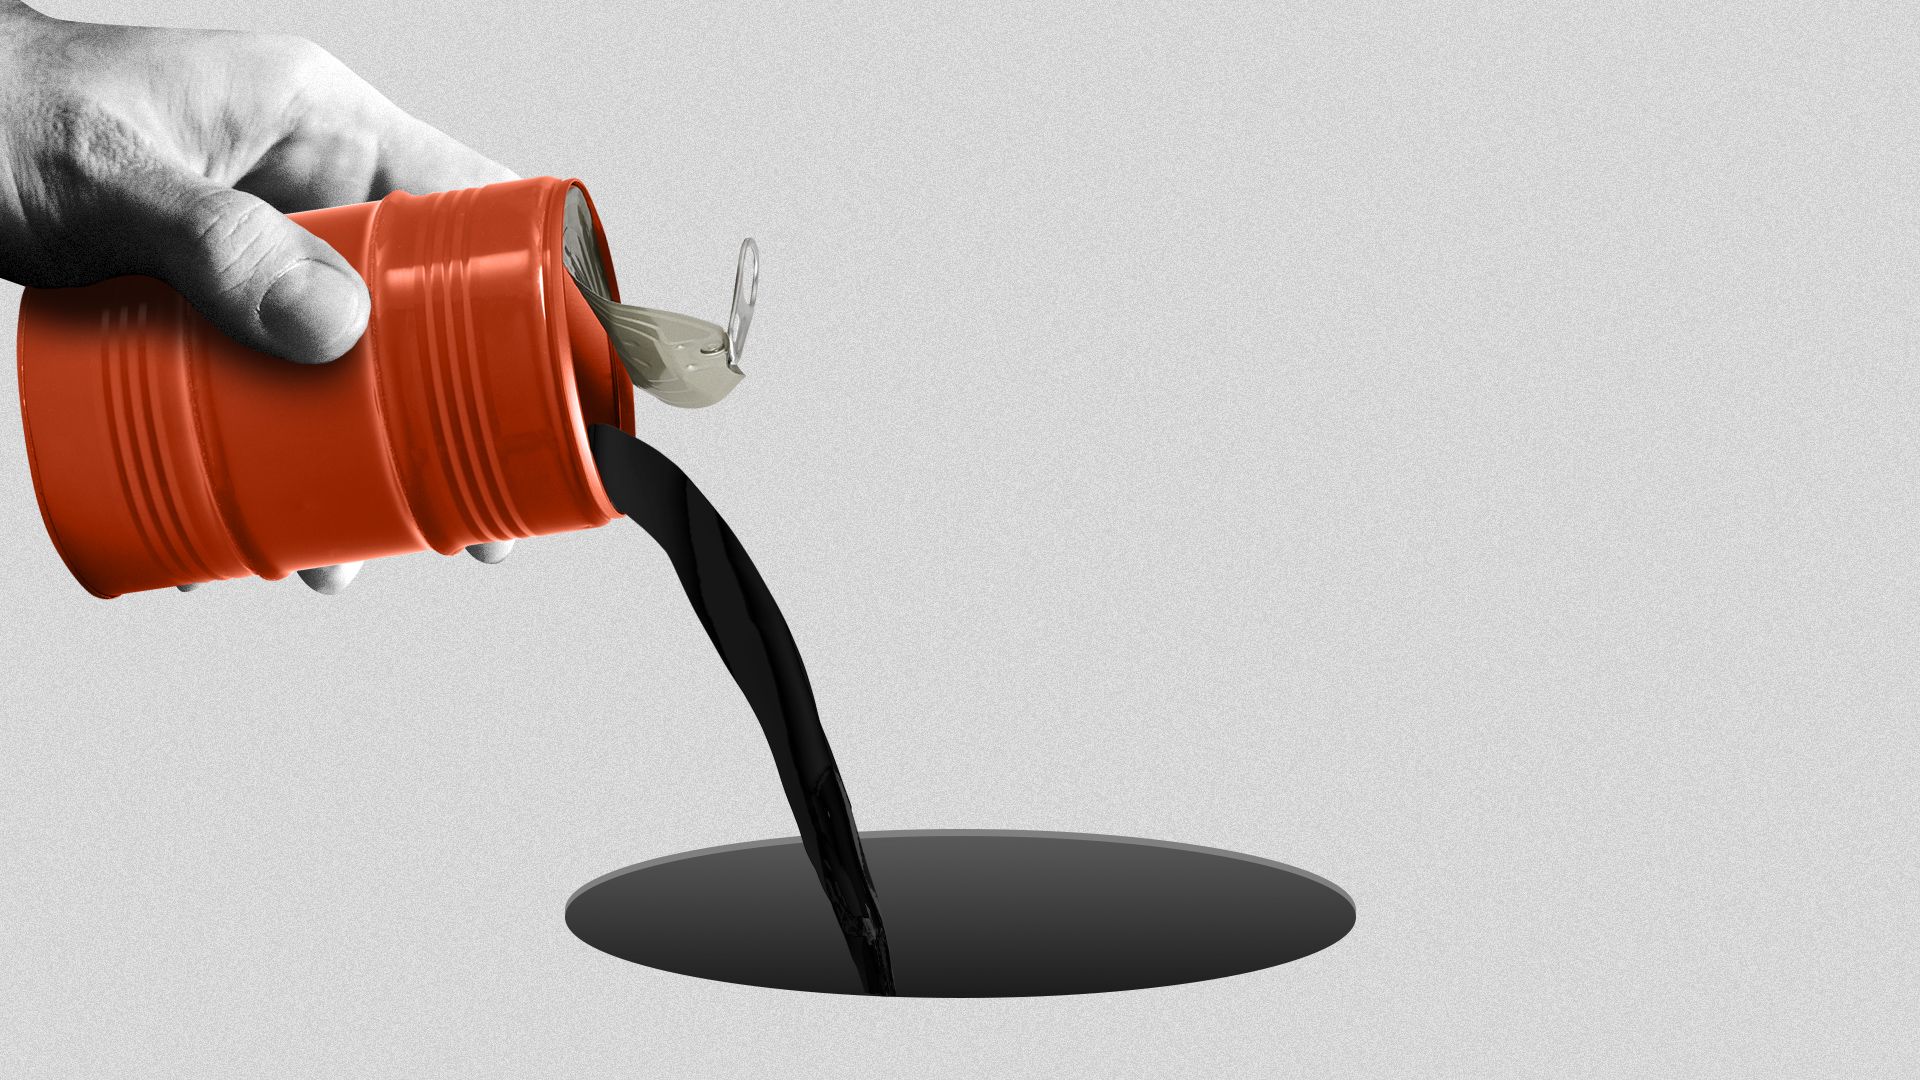  Illustration of a hand pouring oil into a void.